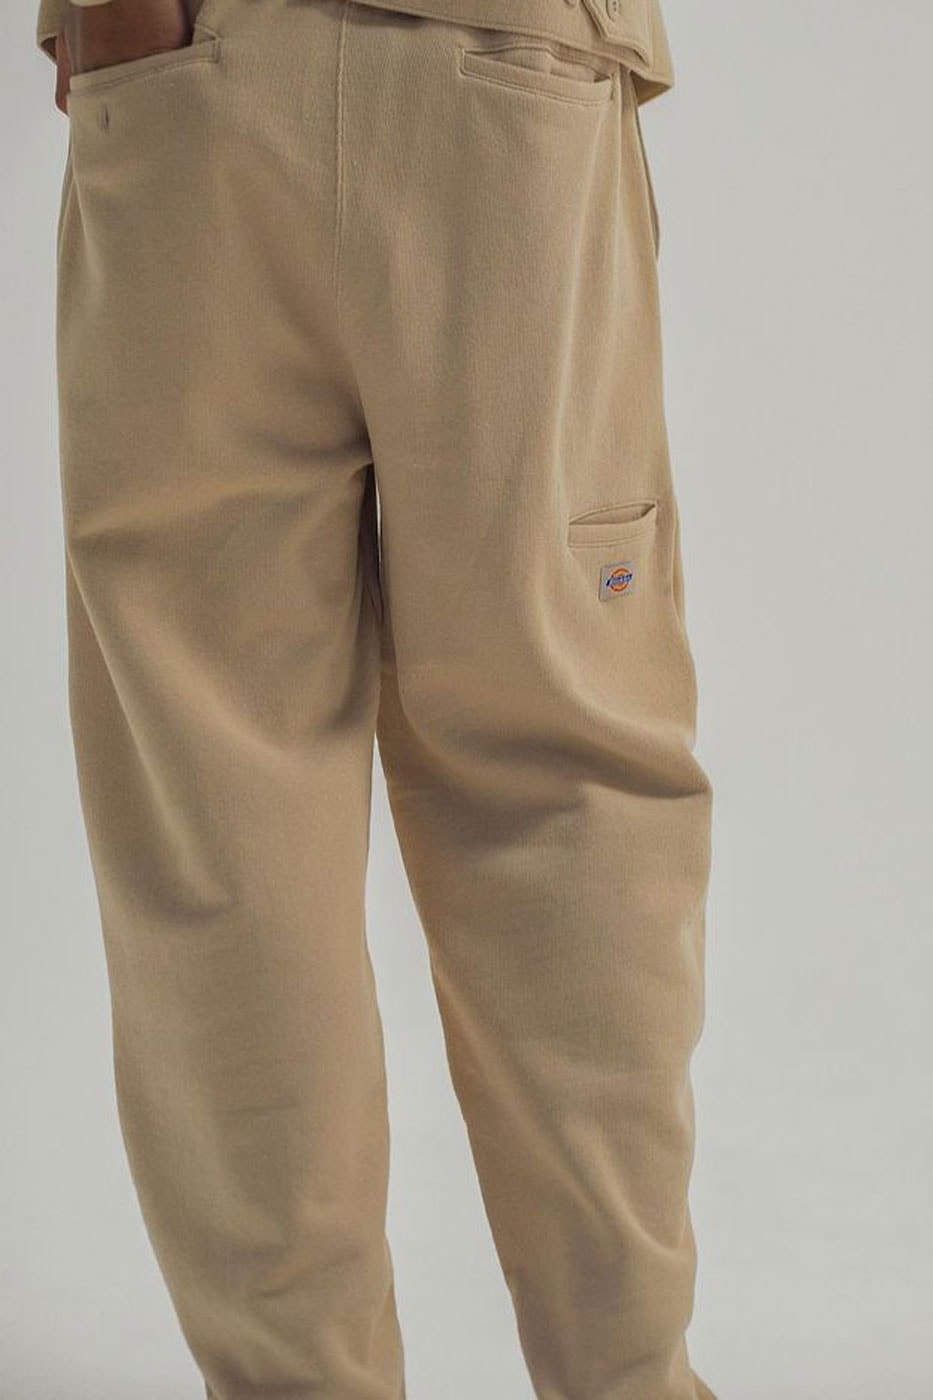 Monkey Time Dickies Deliver Workwear double knee work pant eisenhower jacket grey natural cobalt blue release date info price 